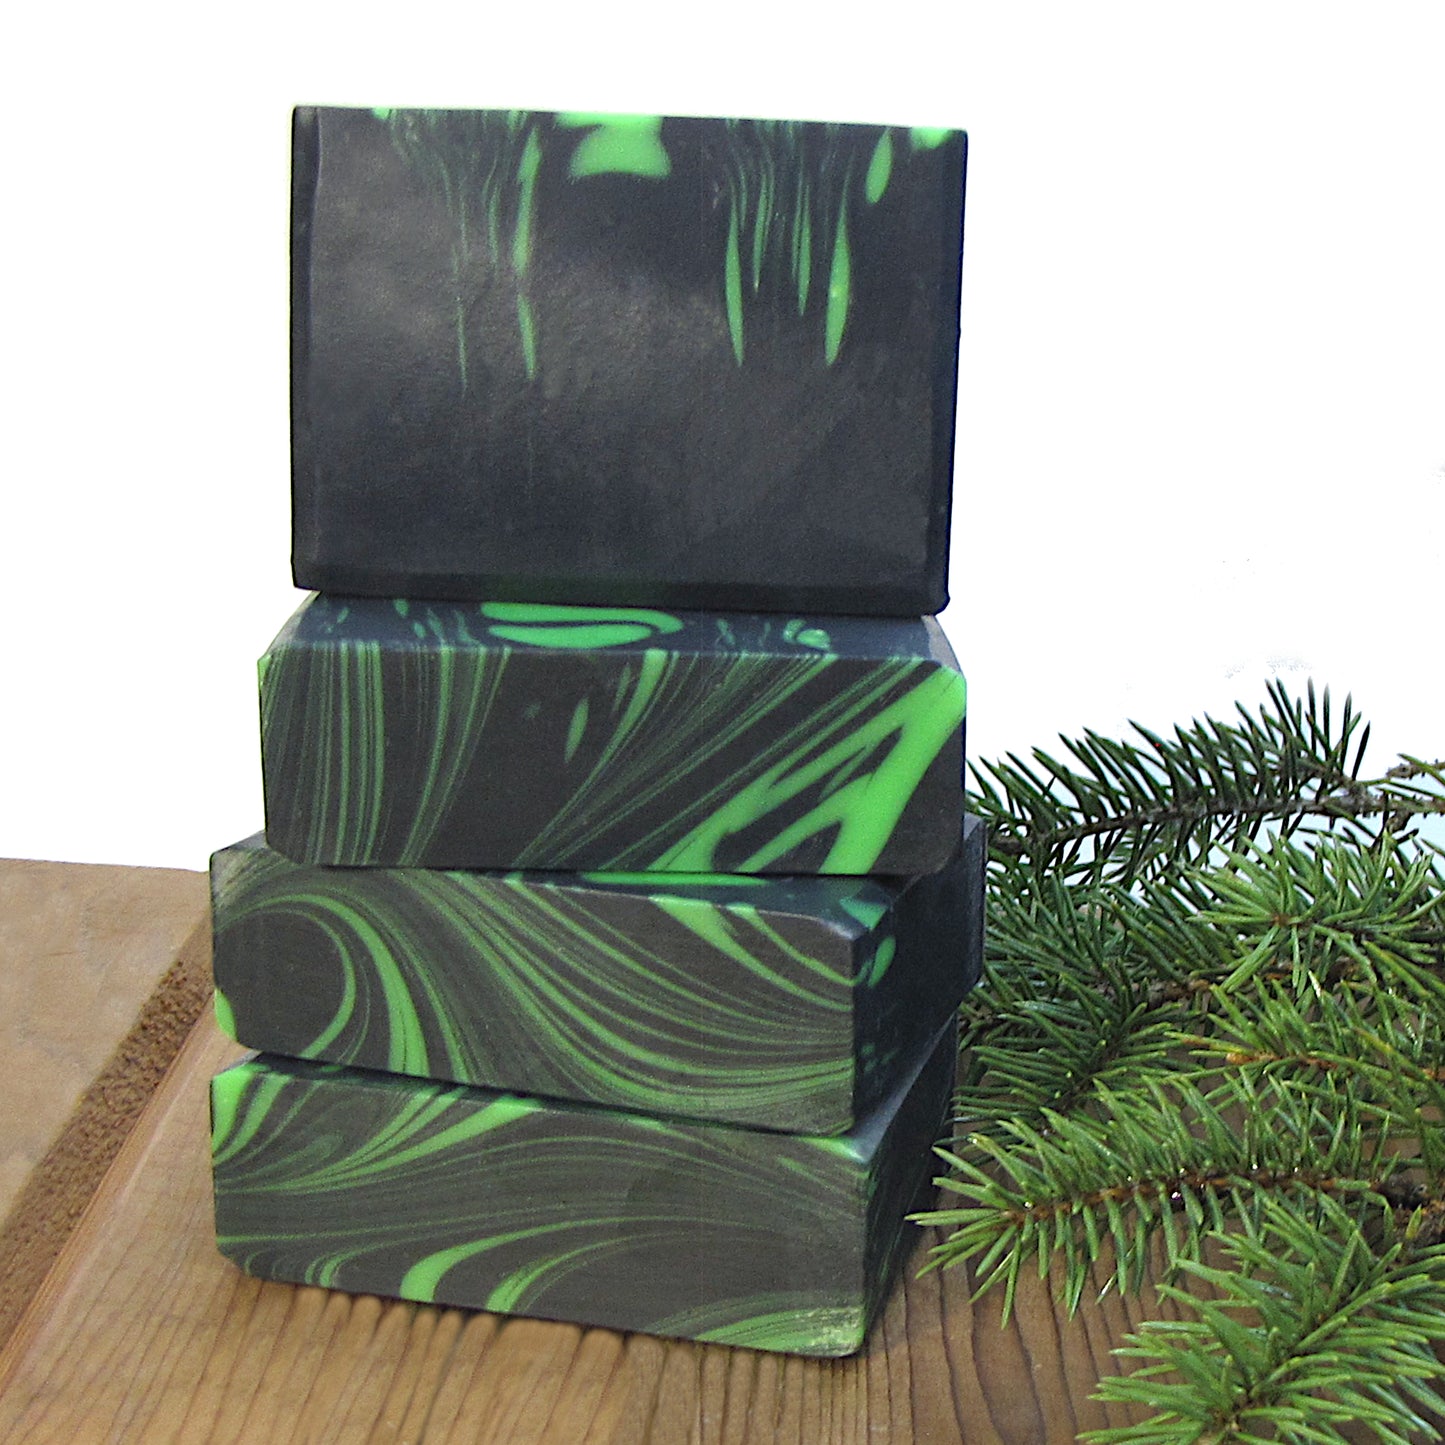 Mountain Man, Pine Scented Charcoal soap